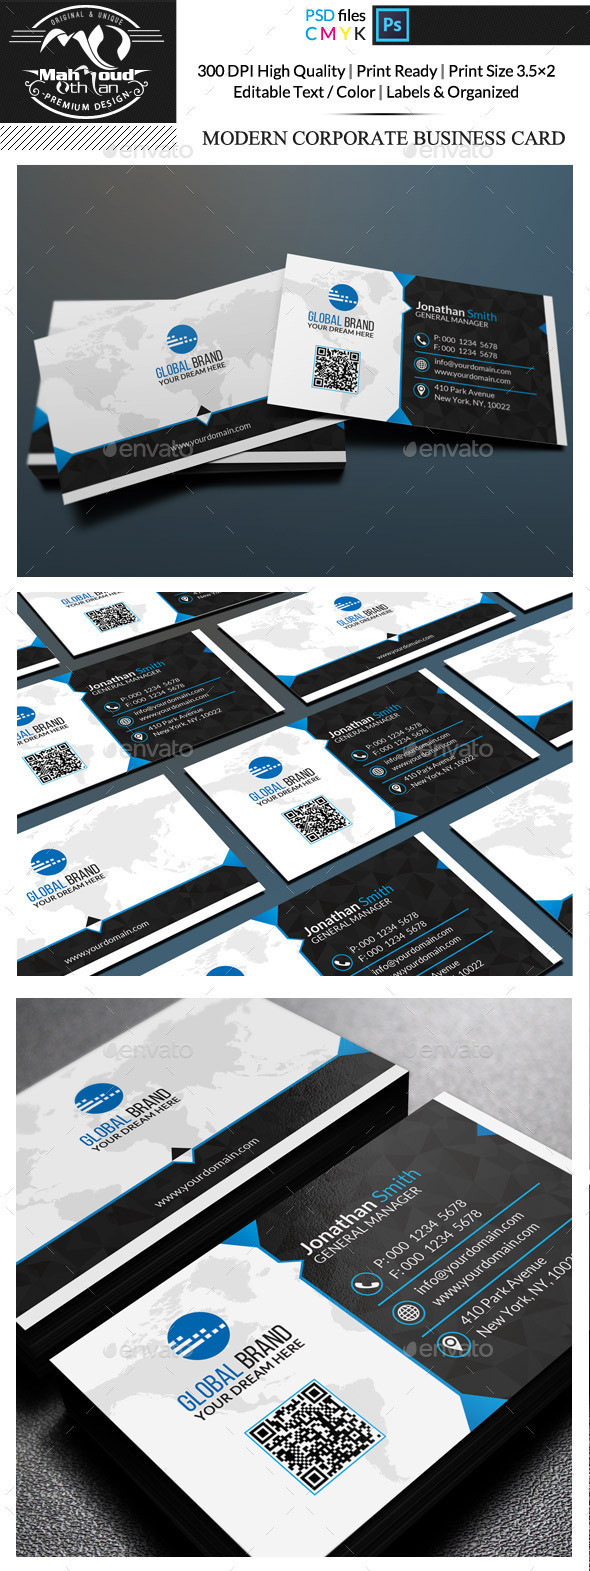 90 modern corporate business card preview